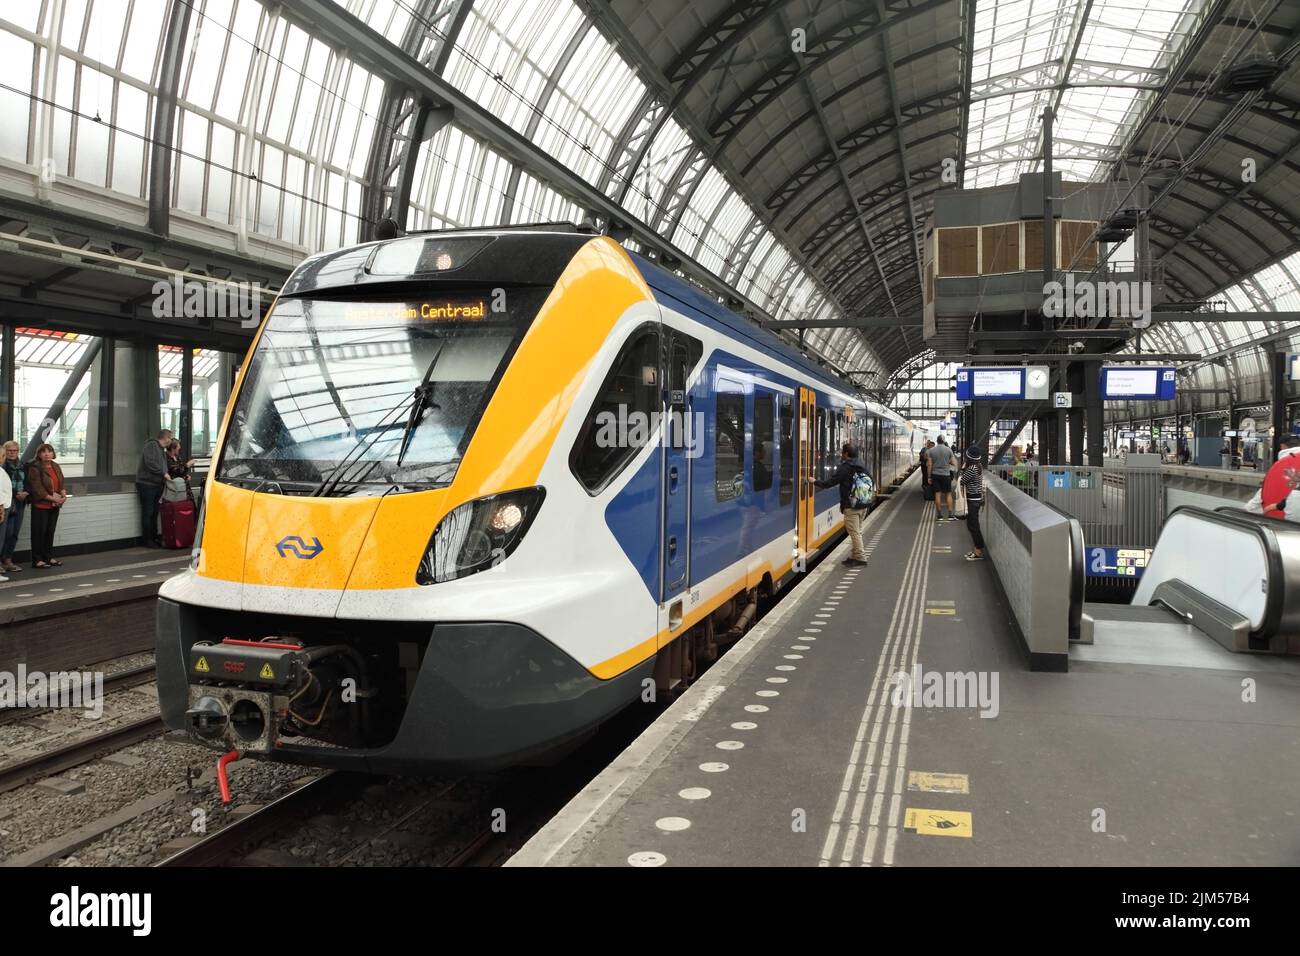 CAF-constructed Sprinter New Generation or SNG Civity train at Amsterdam Centraal railway station, Netherlands. Stock Photo